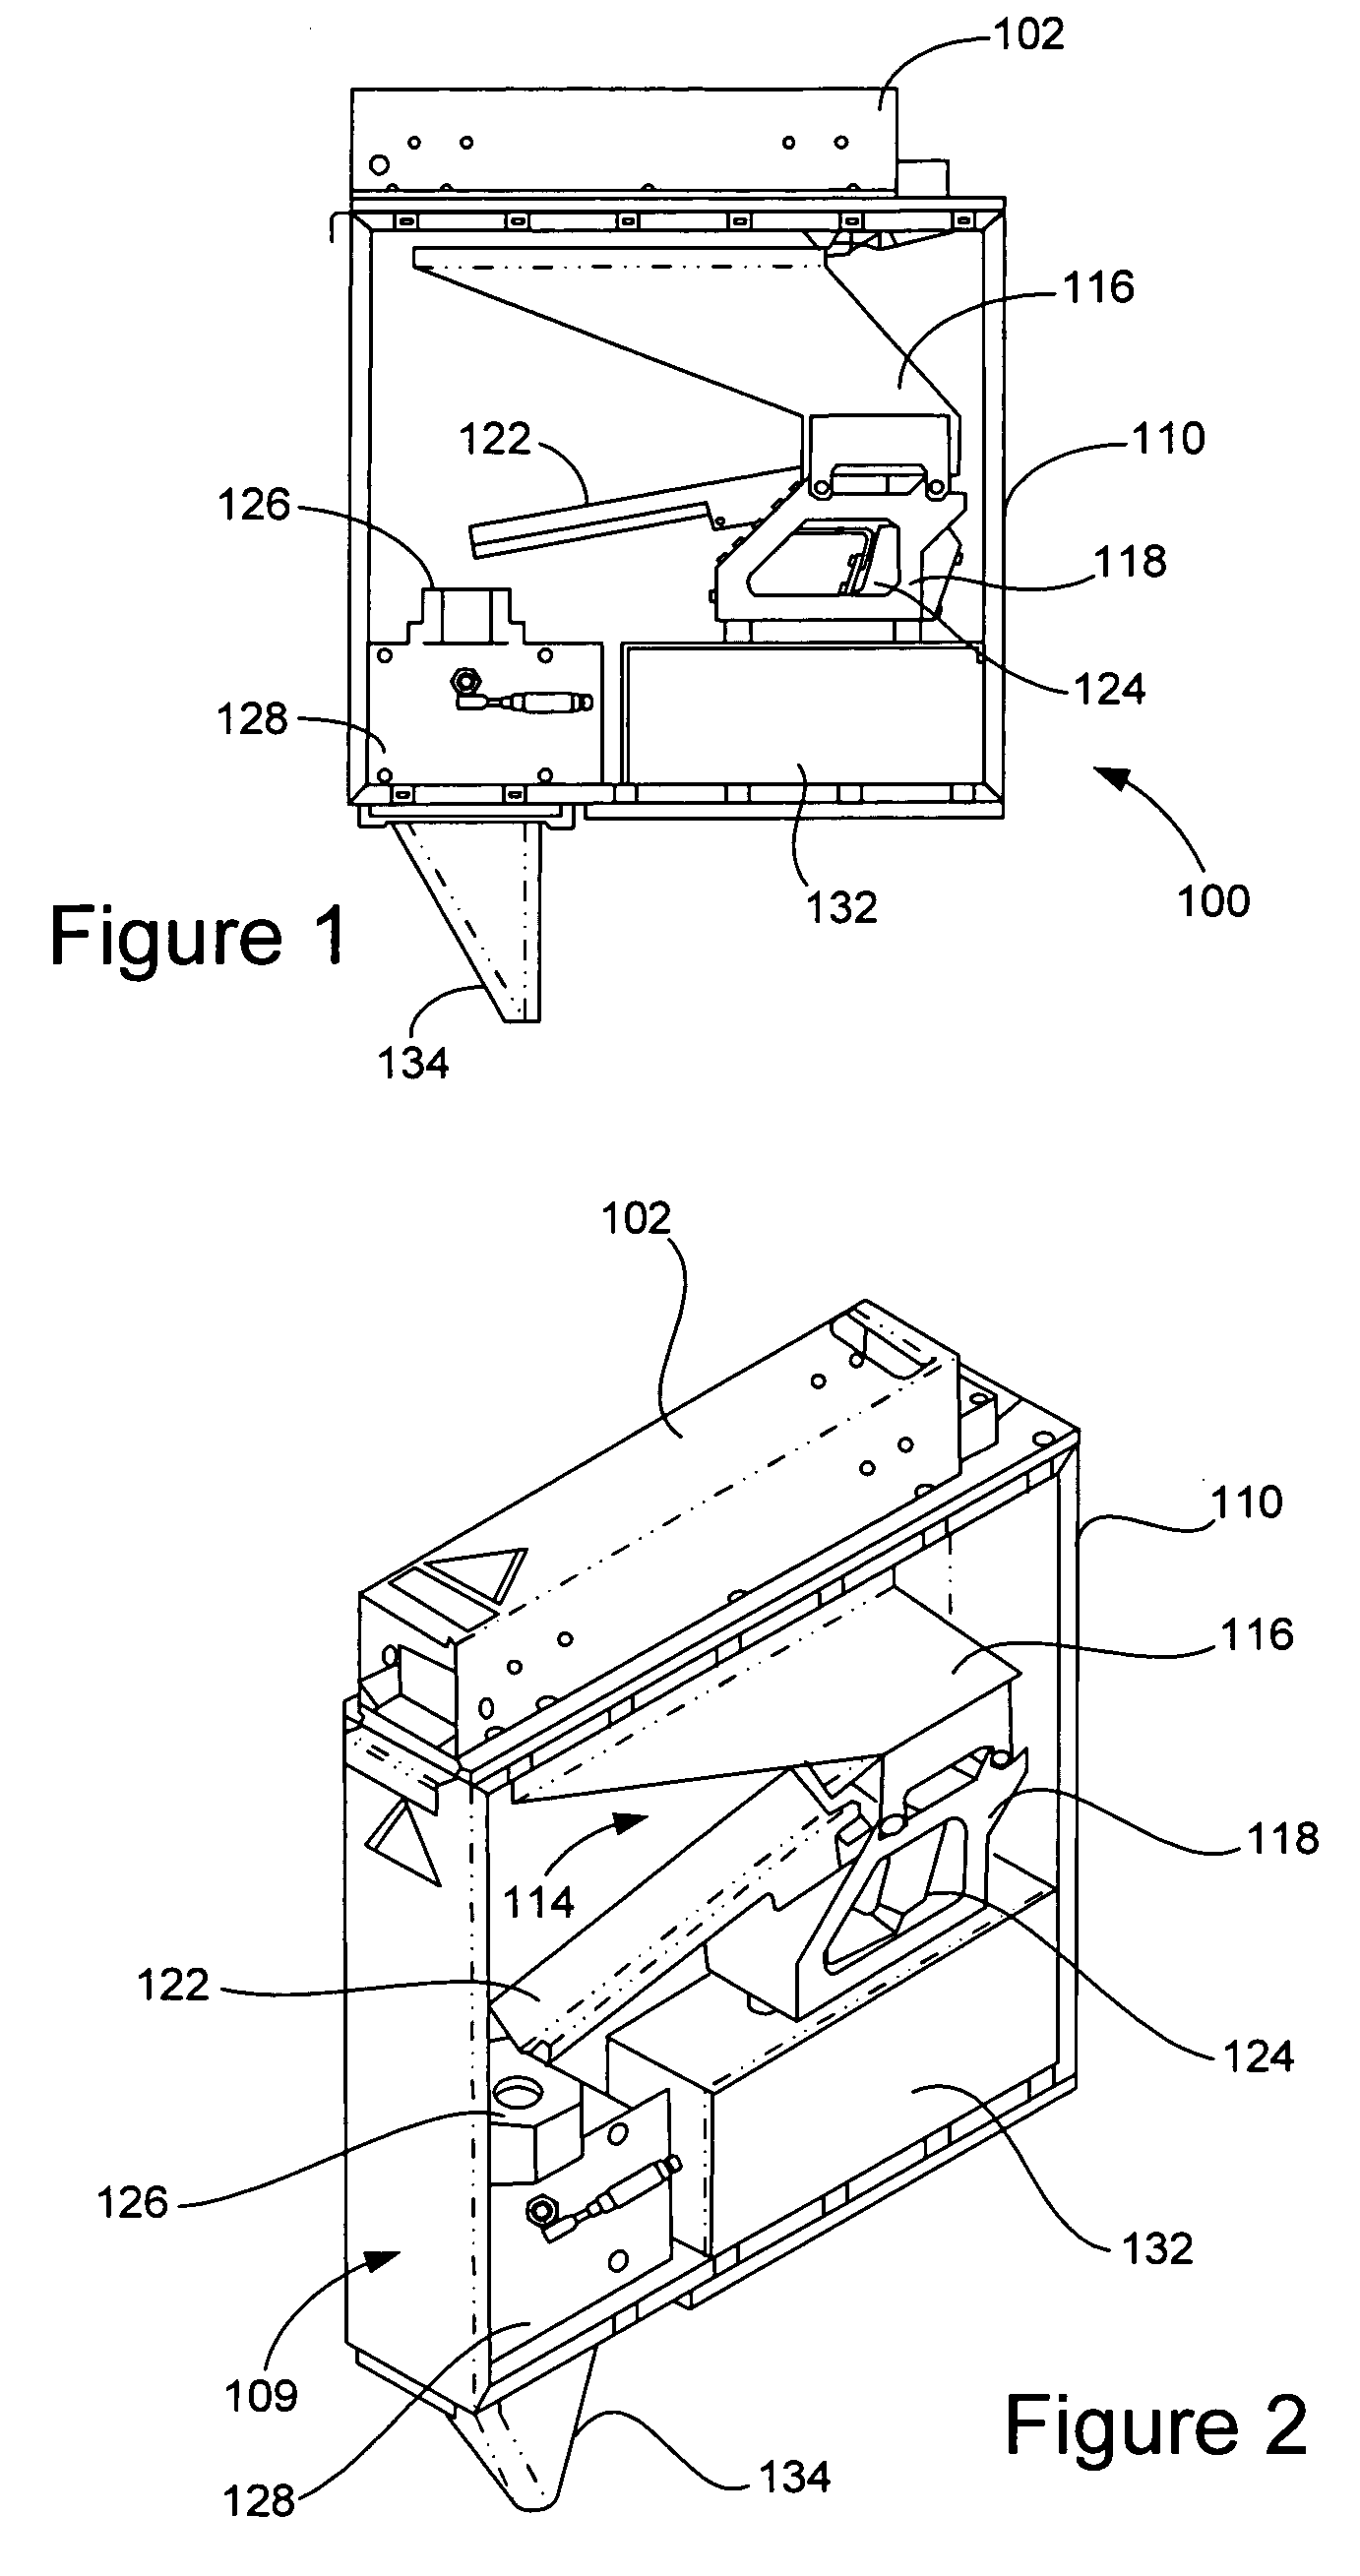 Systems and methods of automated tablet dispensing, prescription filling, and packaging